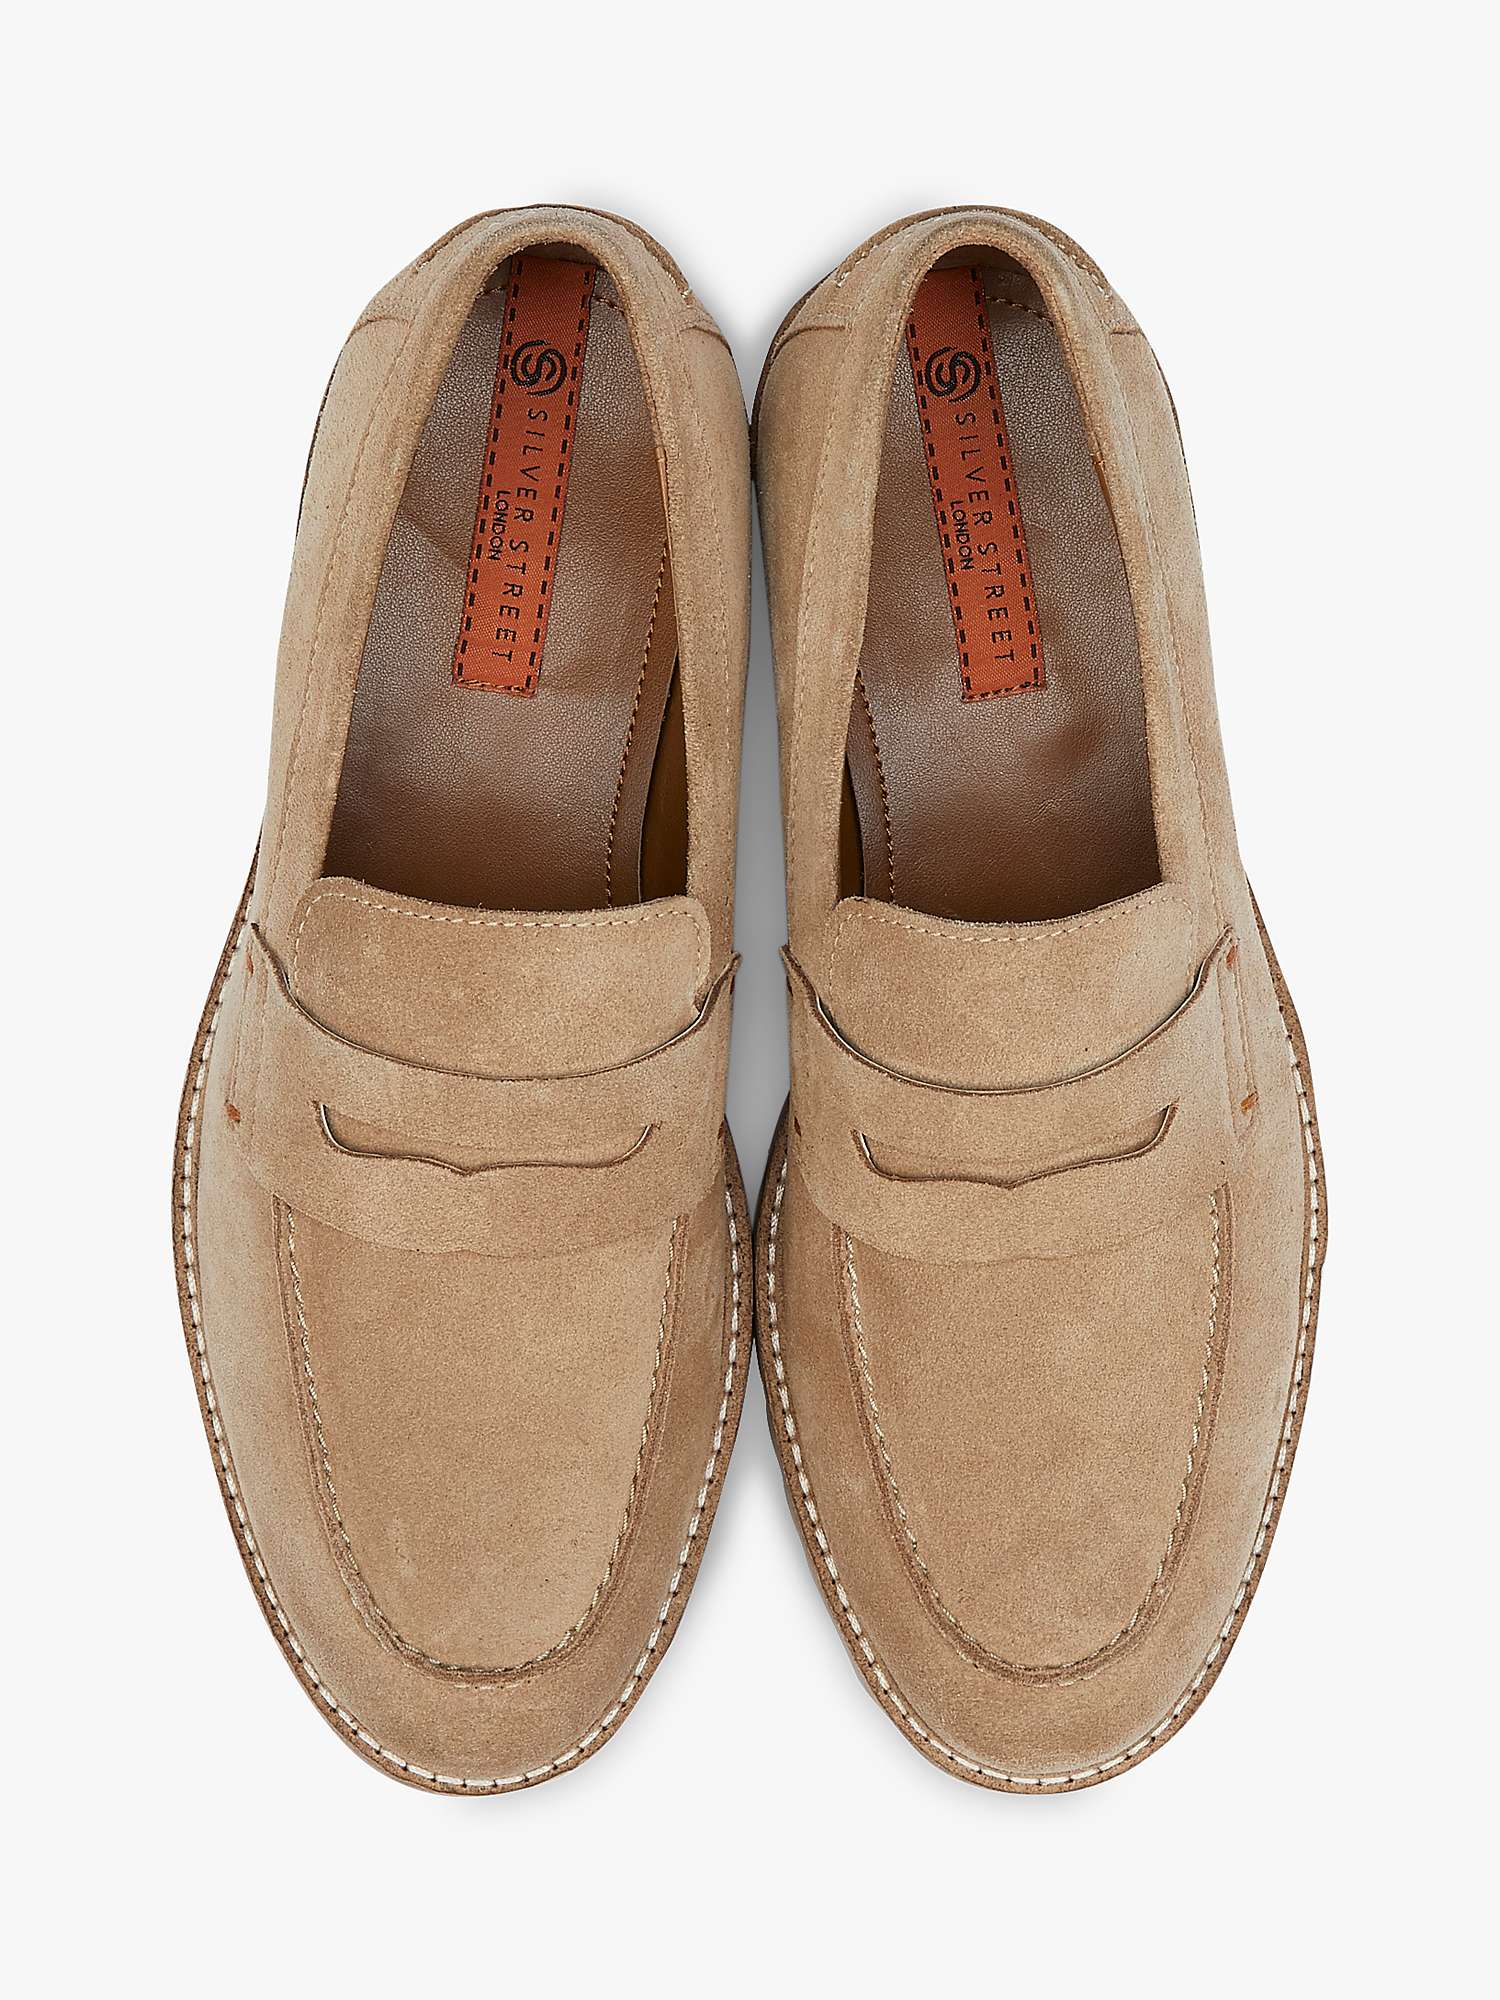 Buy Silver Street London Louisville Suede Loafers Online at johnlewis.com